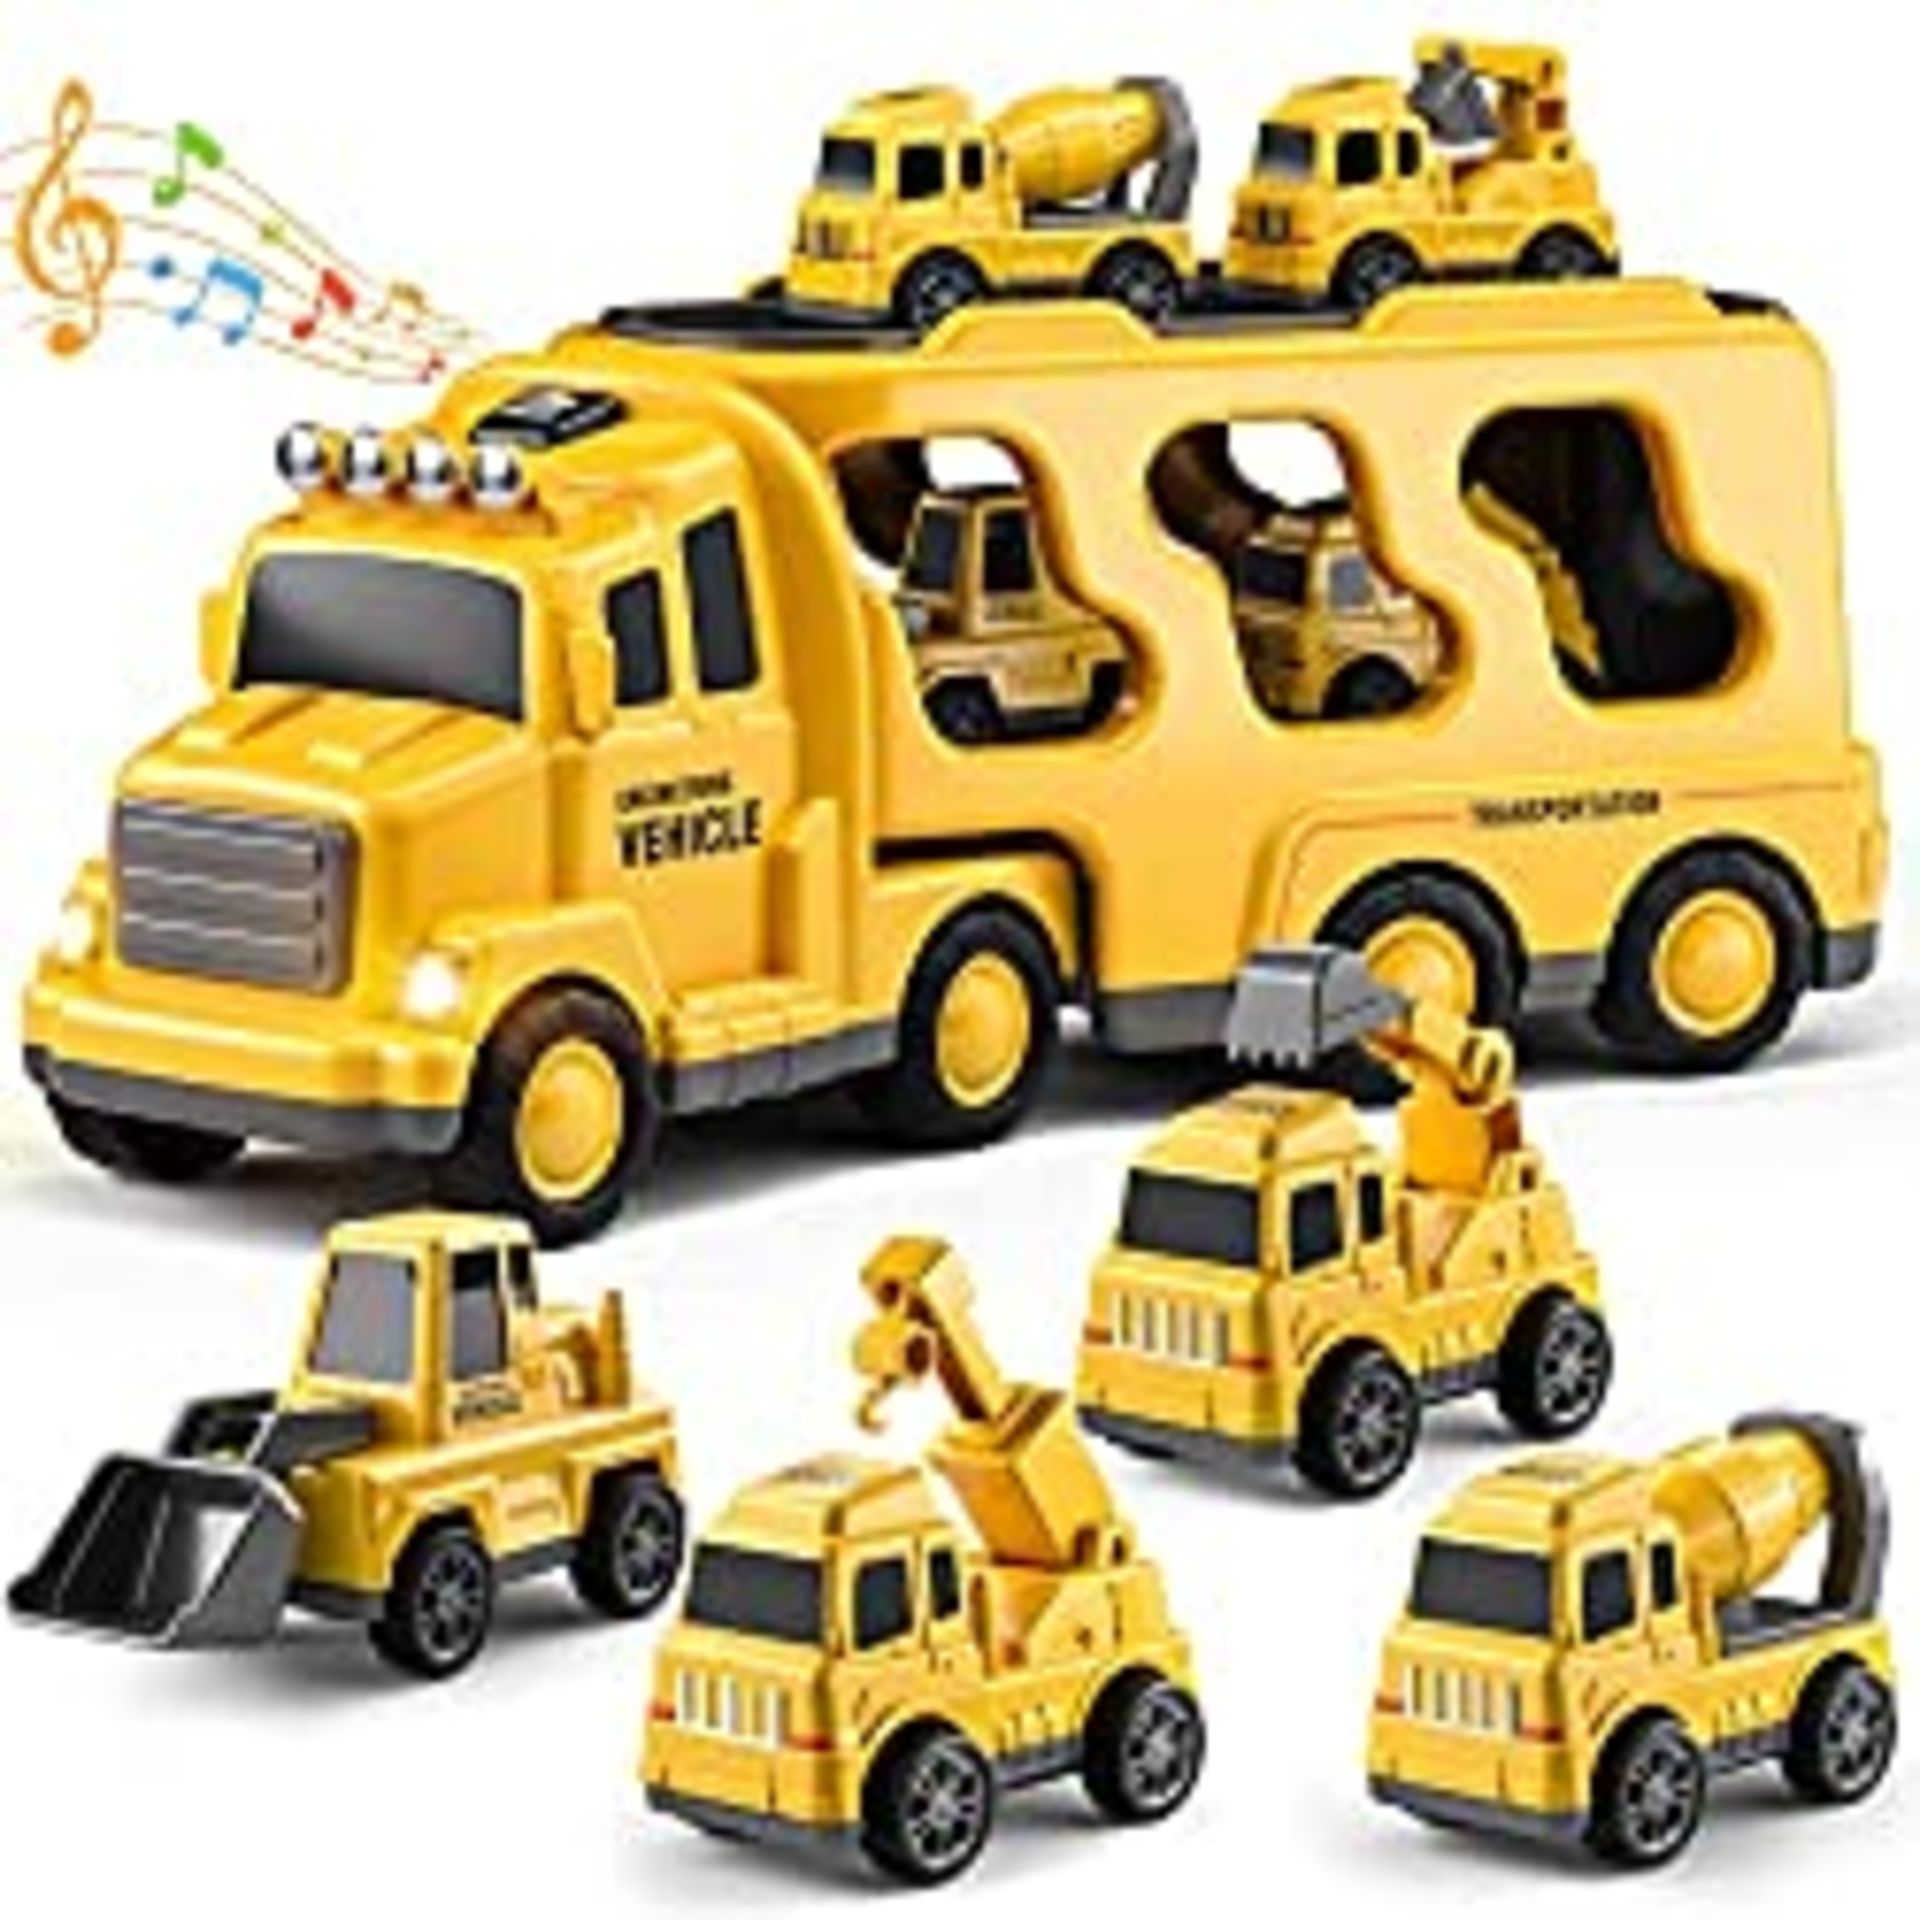 RRP £35.99 TEMI Construction Truck Toys for 1 2 3 4 5 6 Year Old Boys